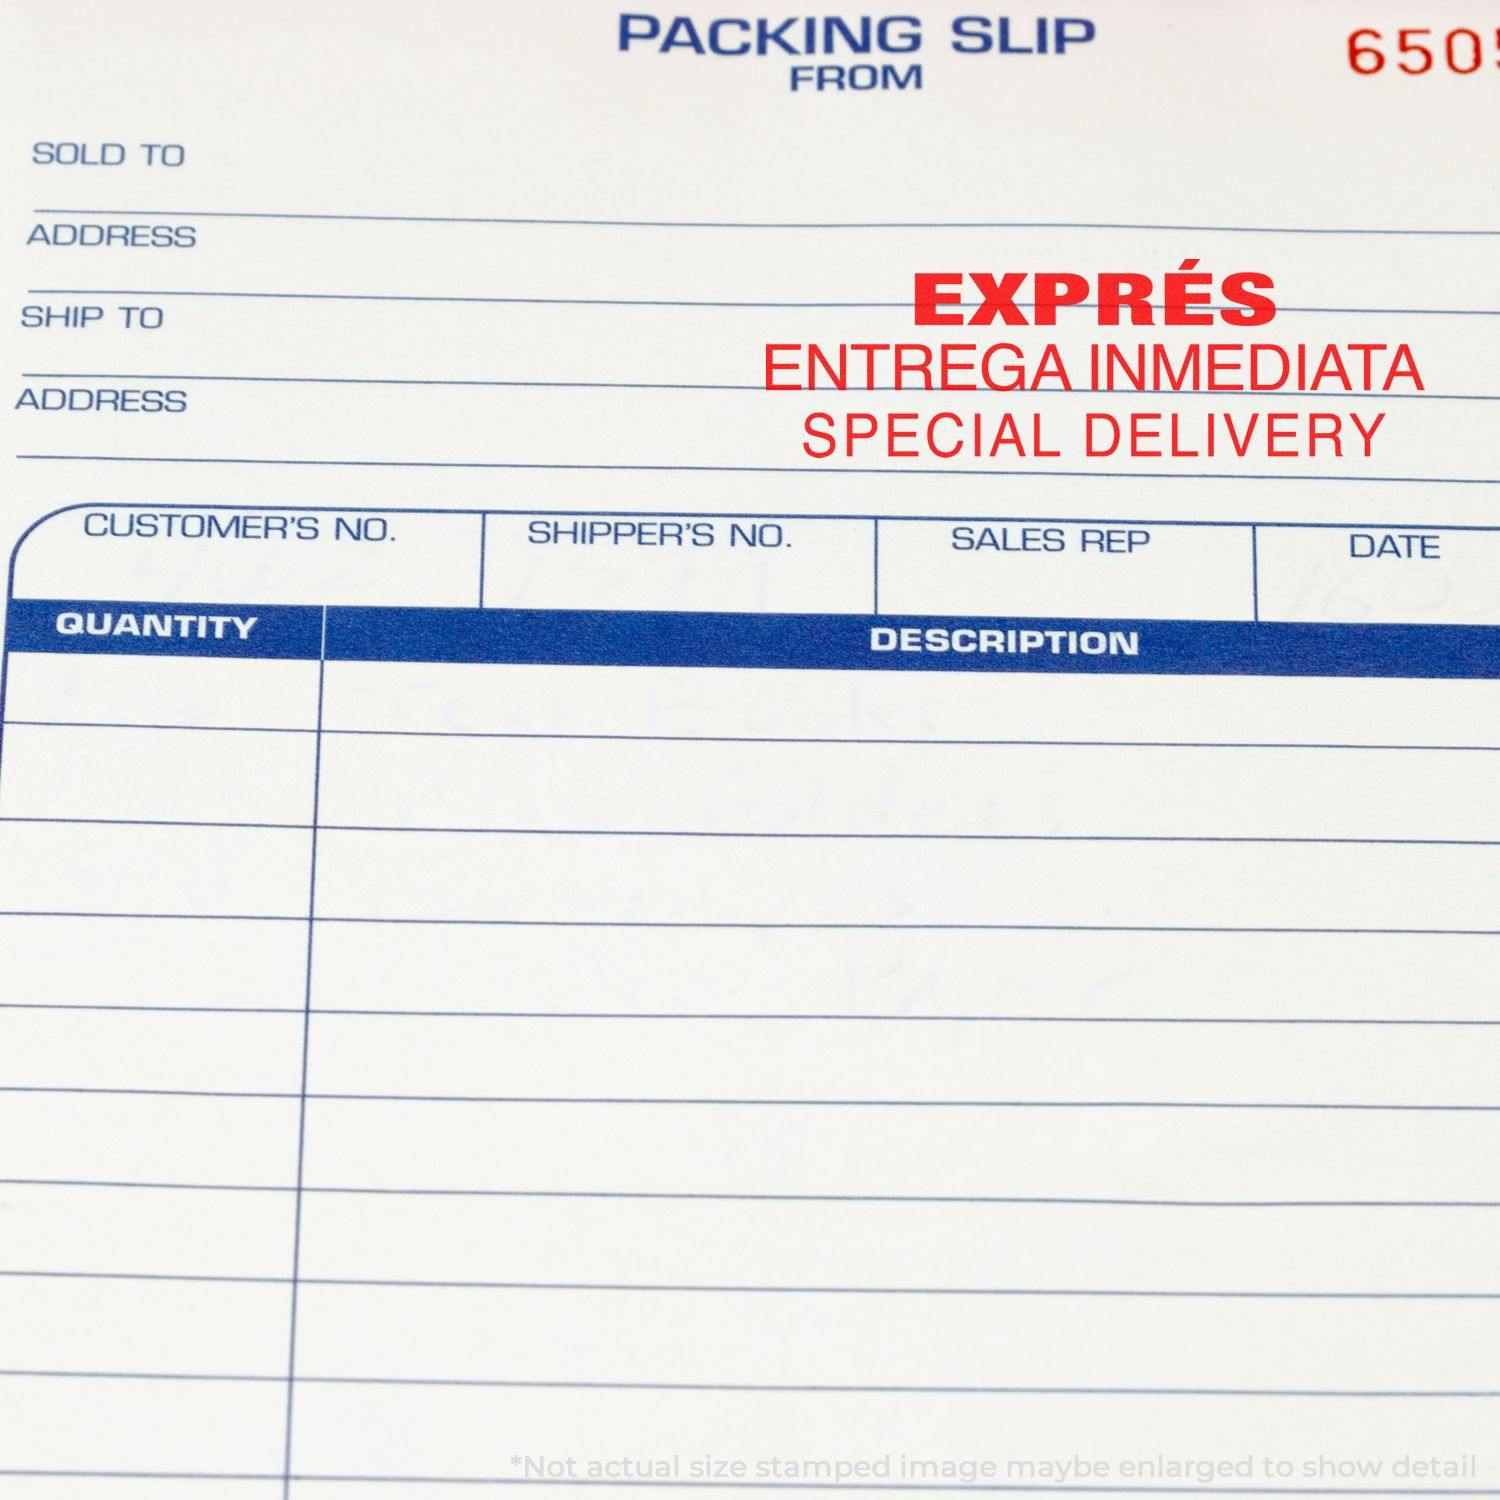 A self-inking stamp with a stamped image showing how the text "EXPRES ENTREGA IMMEDIATA SPECIAL DELIVERY" is displayed after stamping.